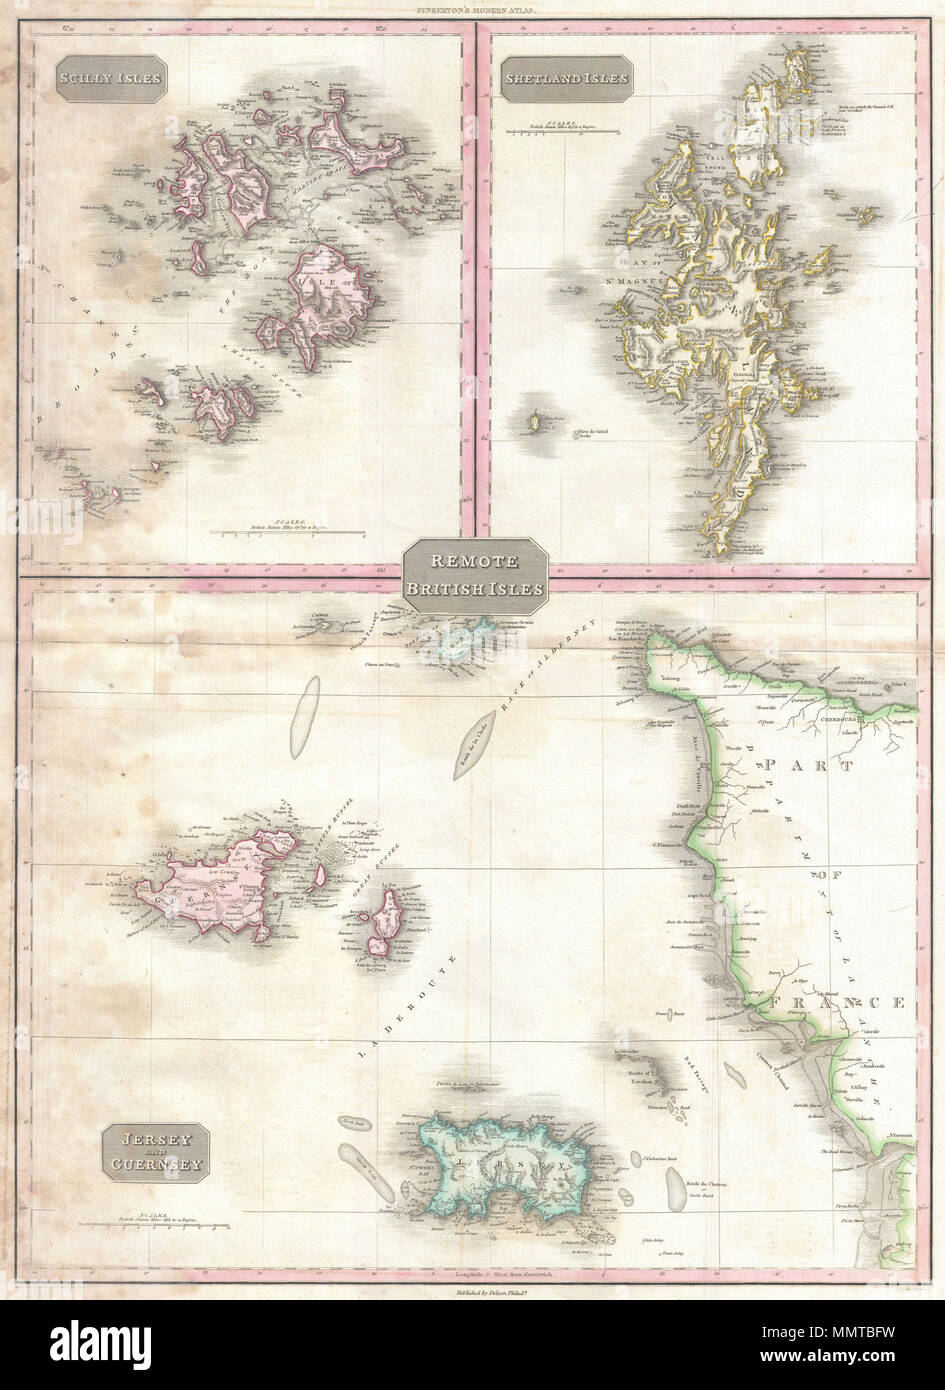 .  English: Pinkerton's extraordinary 1818 map of the Remote British Isles. Essentially three maps in one, this chart depicts the Scilly Isles, the Shetland Isles and the Jersey and Guernsey Islands. Upper left map depicts the Scilly Isles, naming each, and identifying various undersea dangers in the channels between the islands. Upper right map details the Shetland Isles, naming each as well as offering inland details. The lower half of this map is dedicated to the Channel Islands of Jersey, Guernsey and Alderny. Also includes a significant portion of adjacent France. Shows numerous undersea  Stock Photo